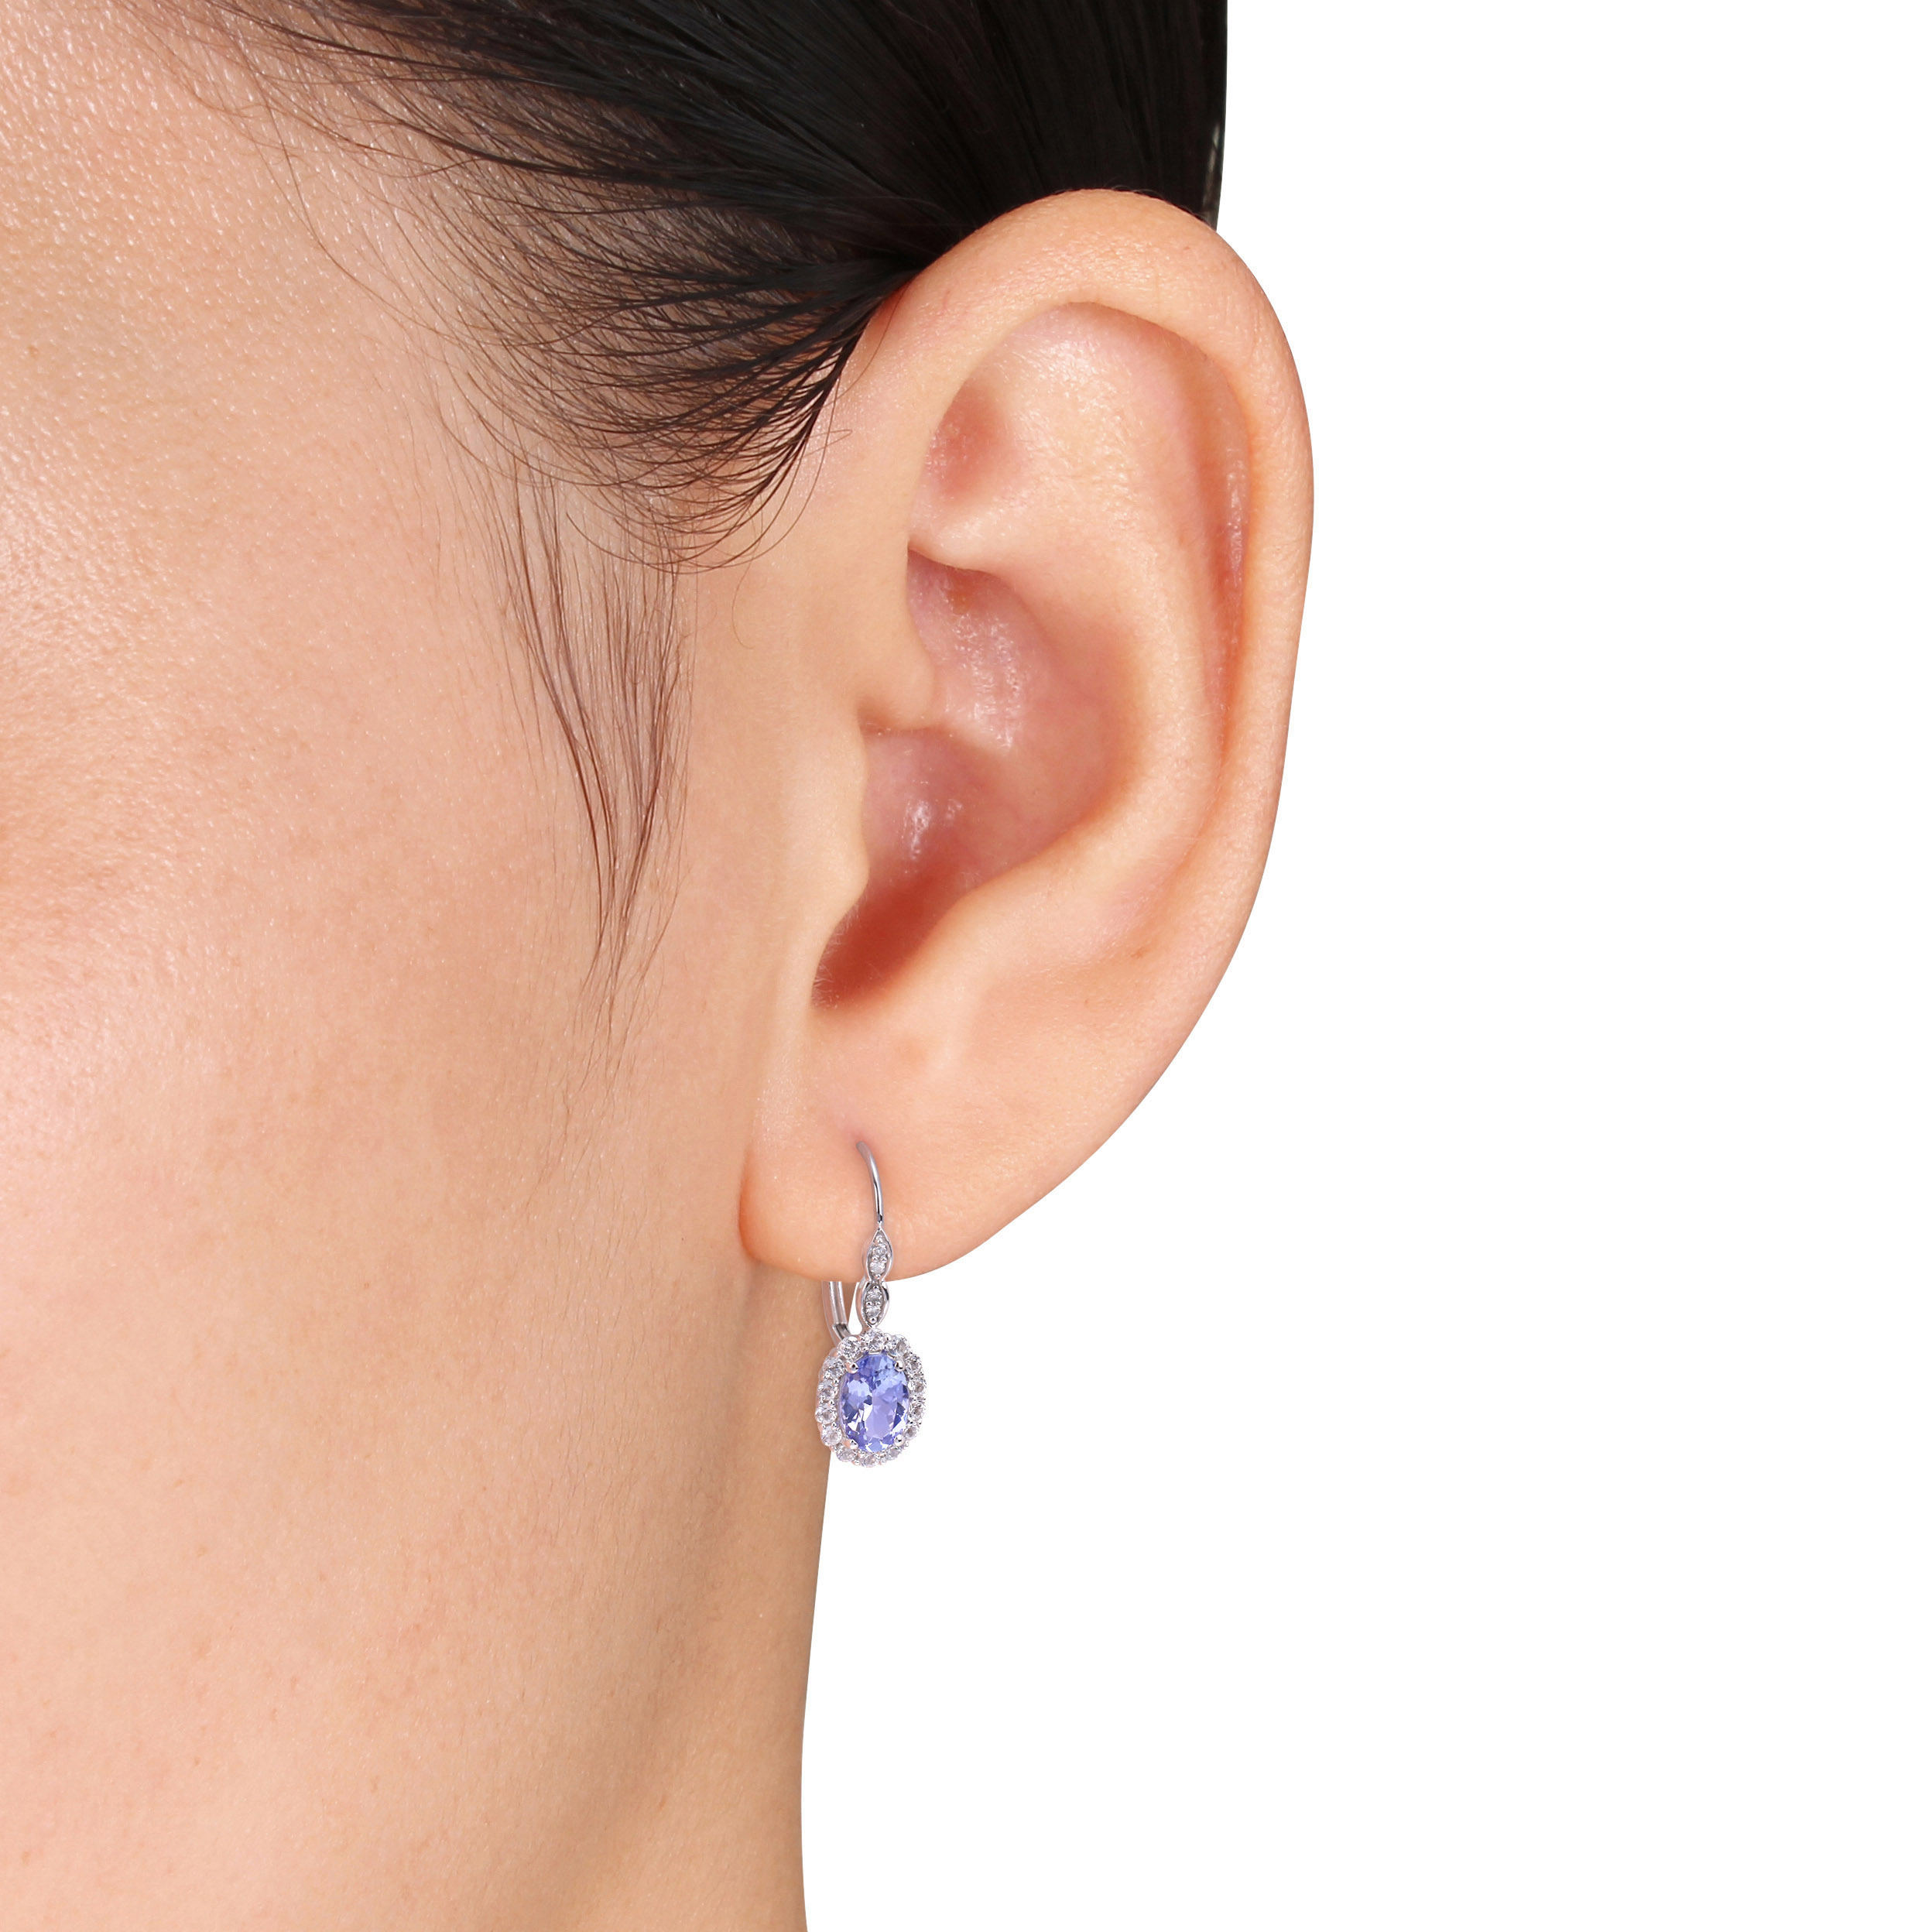 Oval Shape Tanzanite, White Topaz and Diamond Accent Vintage Halo LeverBack Earrings in 14k White Gold